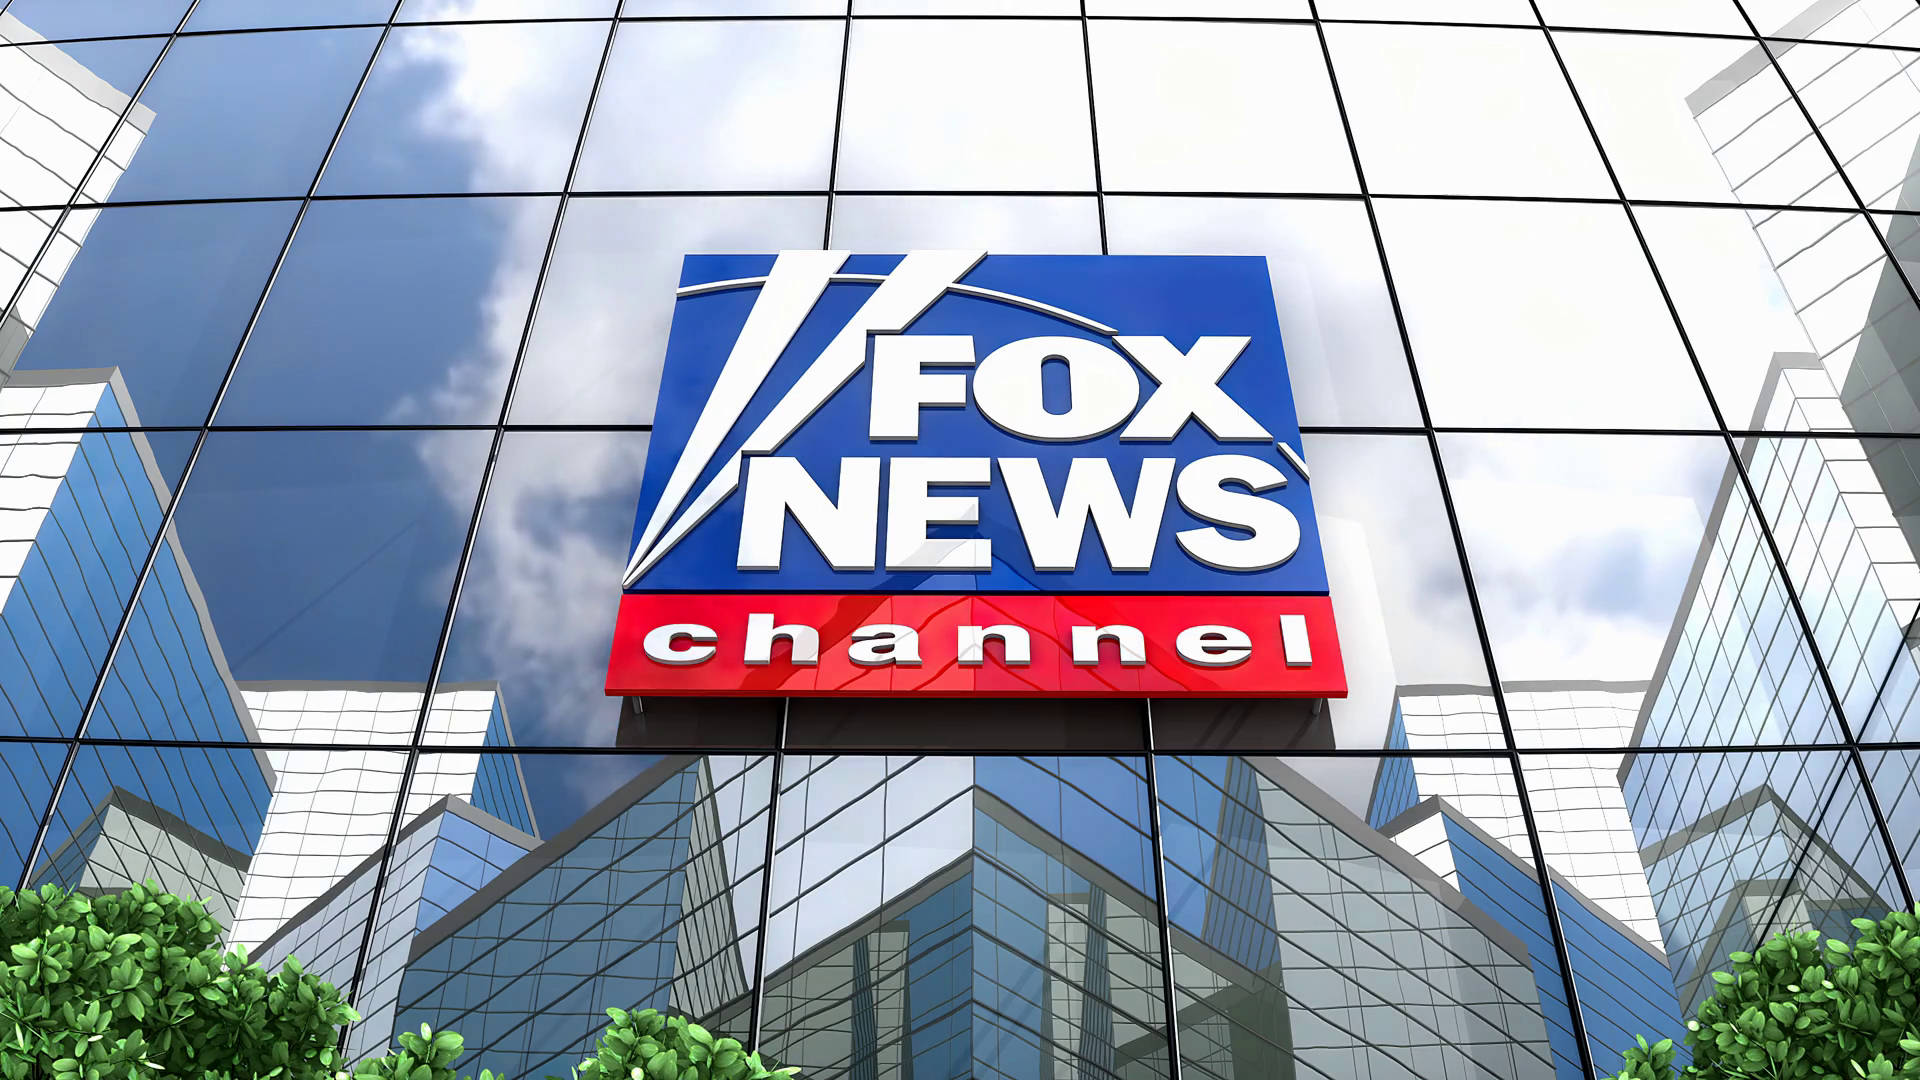 Fox News Channel Wall Signage Background